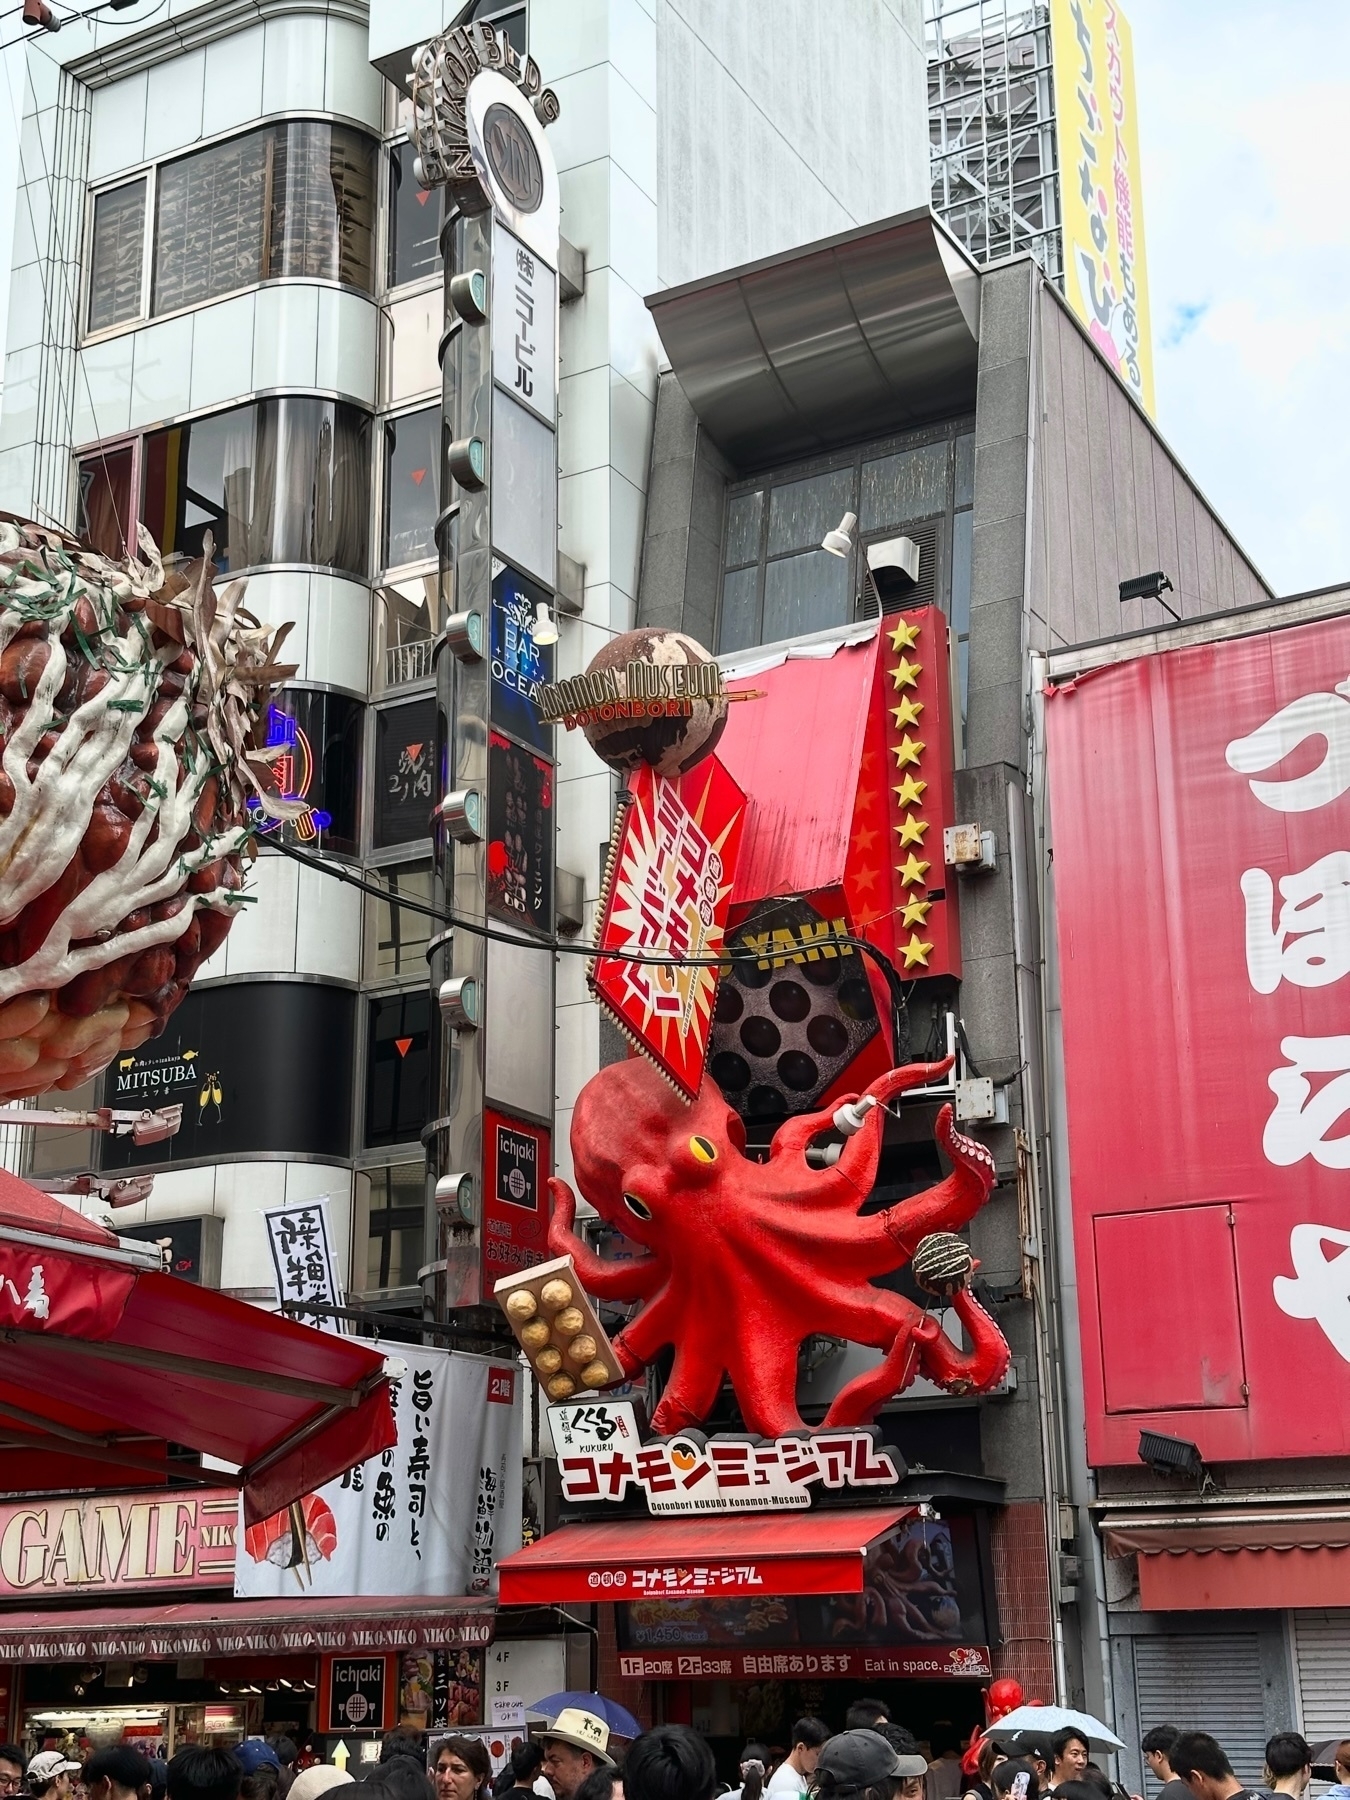 A busy street scene in Japan with a large red octopus sculpture above a restaurant entrance, surrounded by various signs and banners, and a crowd of people walking below.